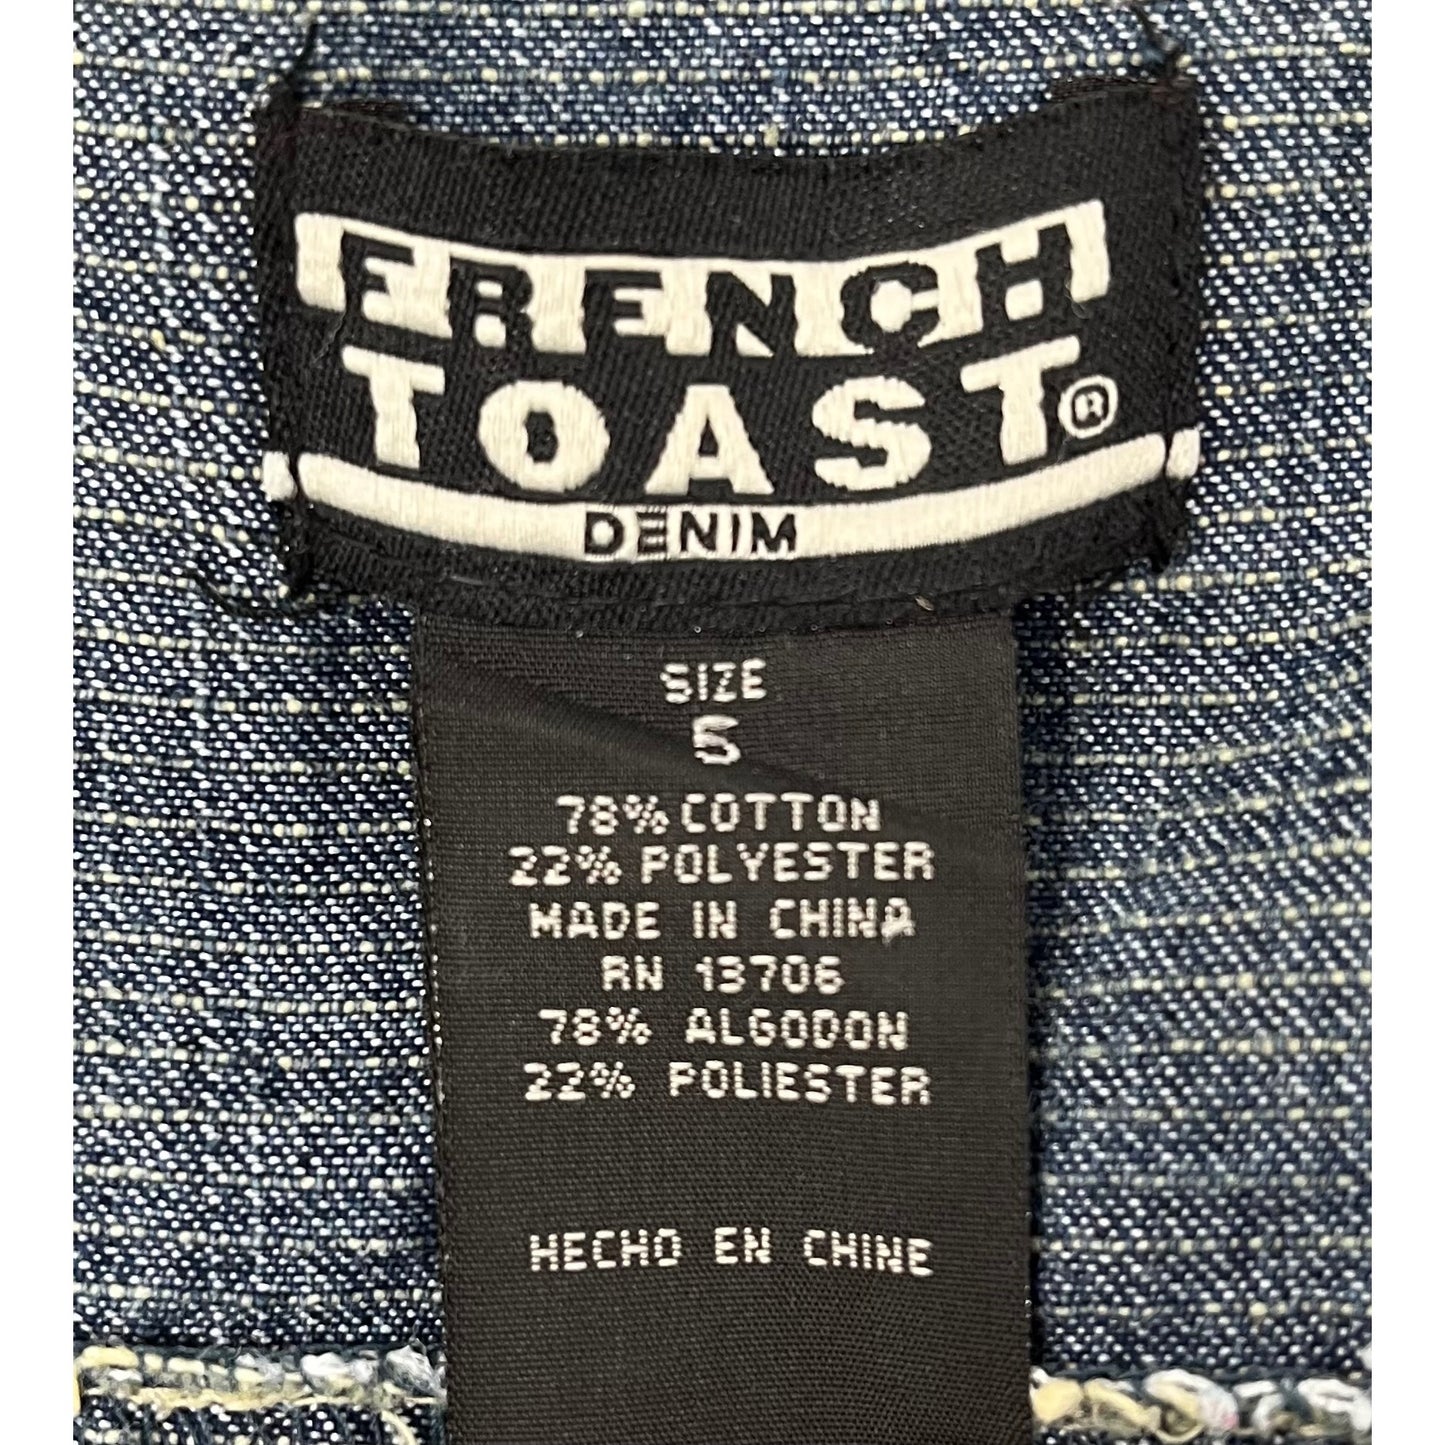 French Toast Girl's Size 6 Button-Down Denim Vest